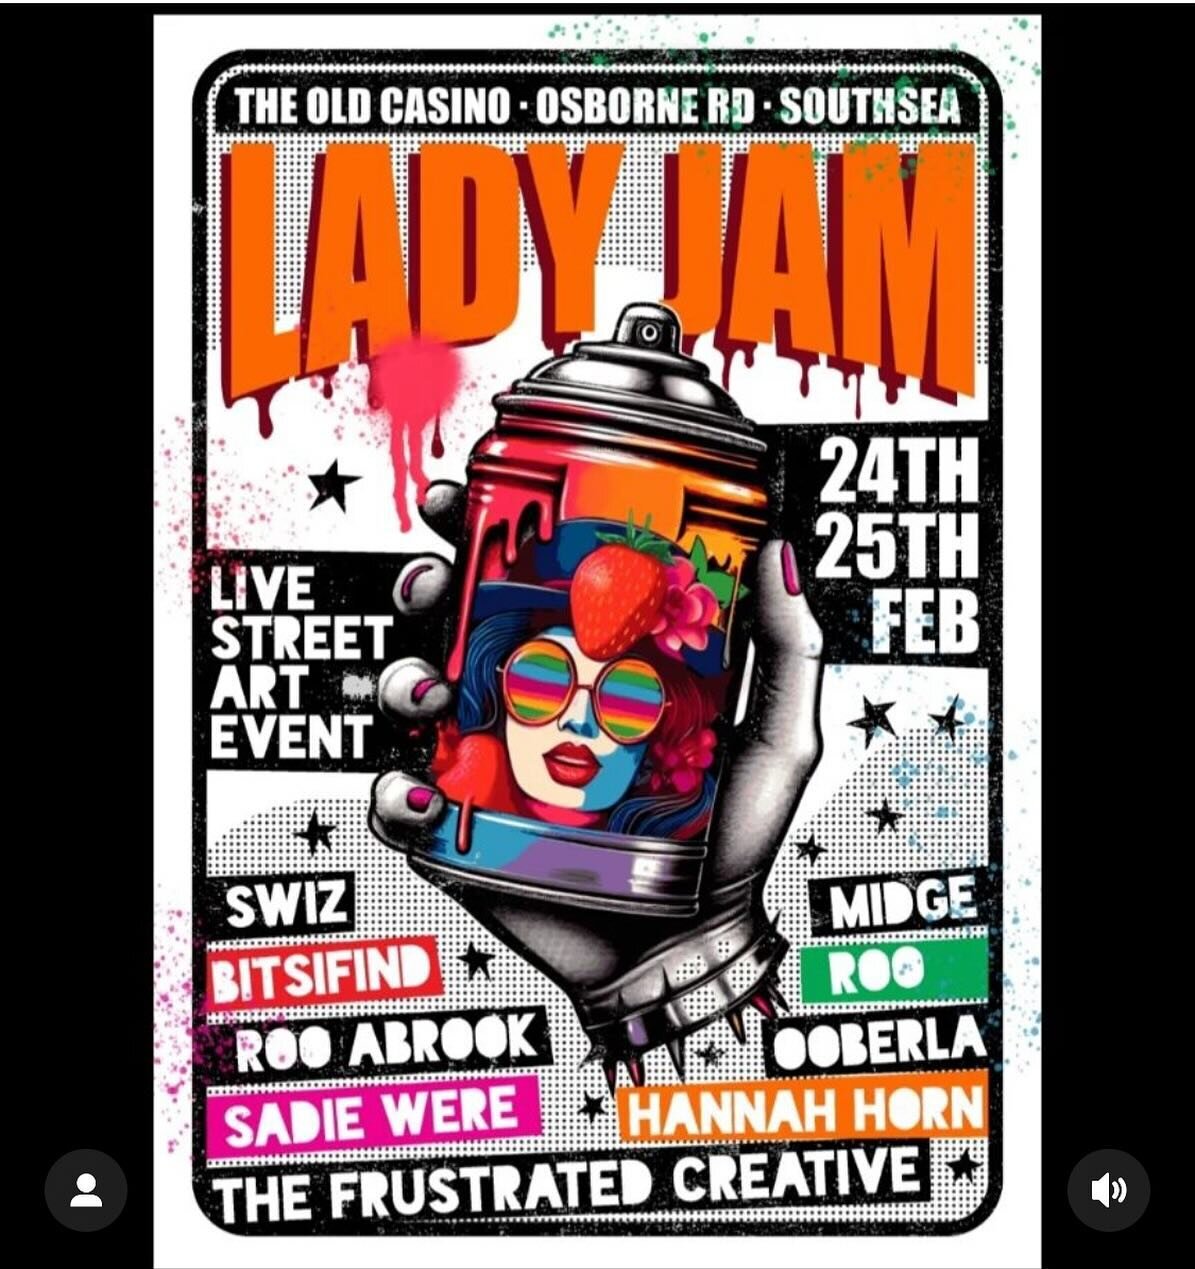 If you&rsquo;re in Portsmouth this weekend head down to Osborne road southsea where @thisismidge has organised a paint jam on the side of the old casino. (Beside the #lookupportsmouth Phlegm wall). 9 artists will be live painting all weekend includin